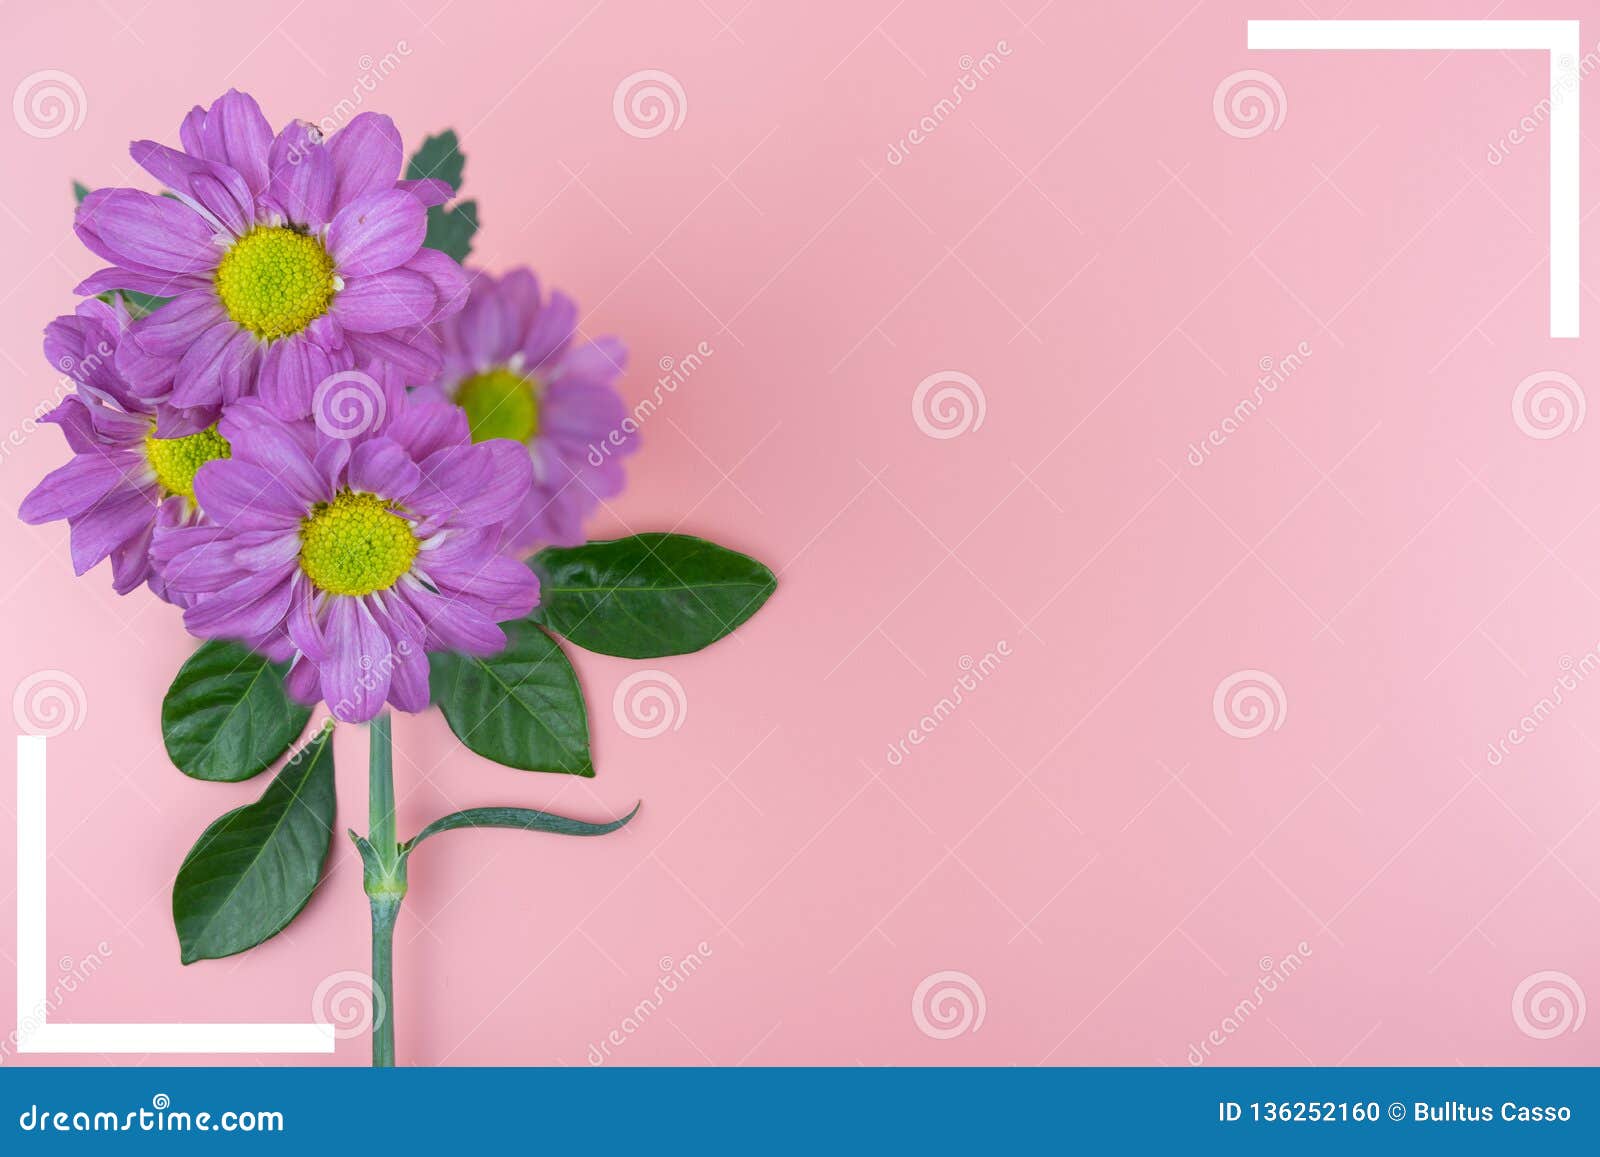 Violet Flowers Frame Stock Images - Download 8,204 Royalty Free Photos